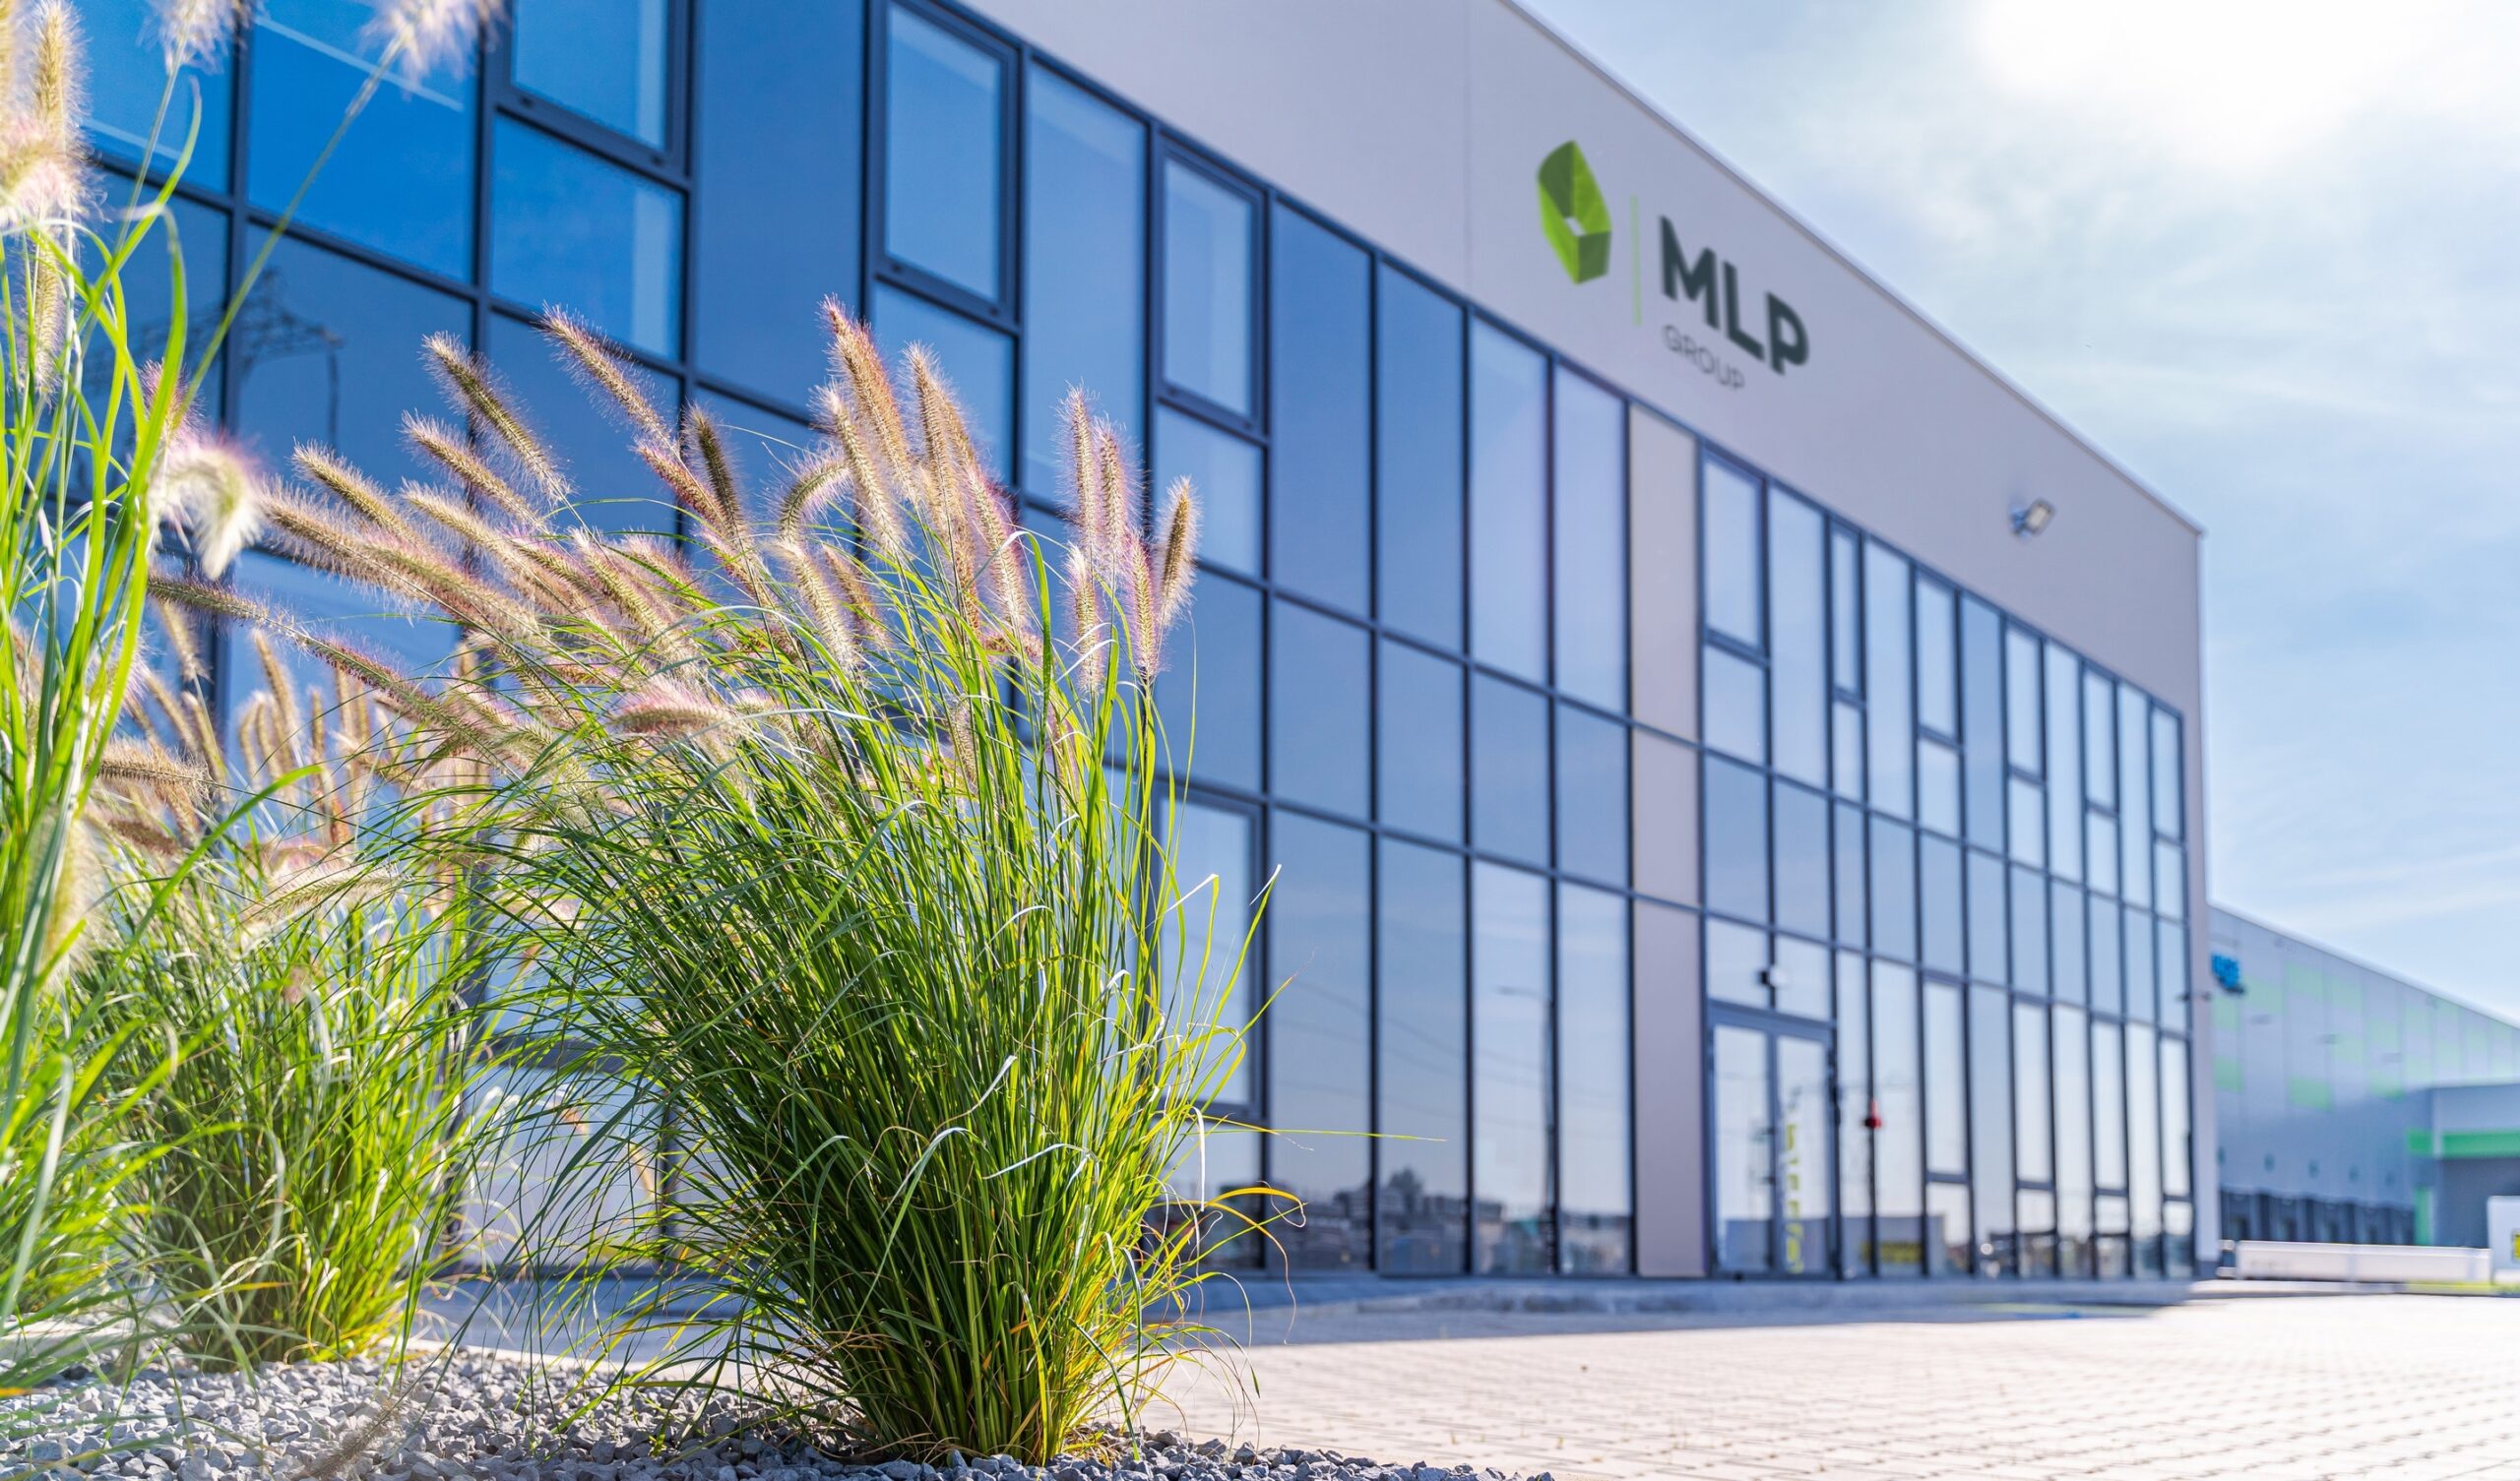 MLP Wrocław welcomes new tenant